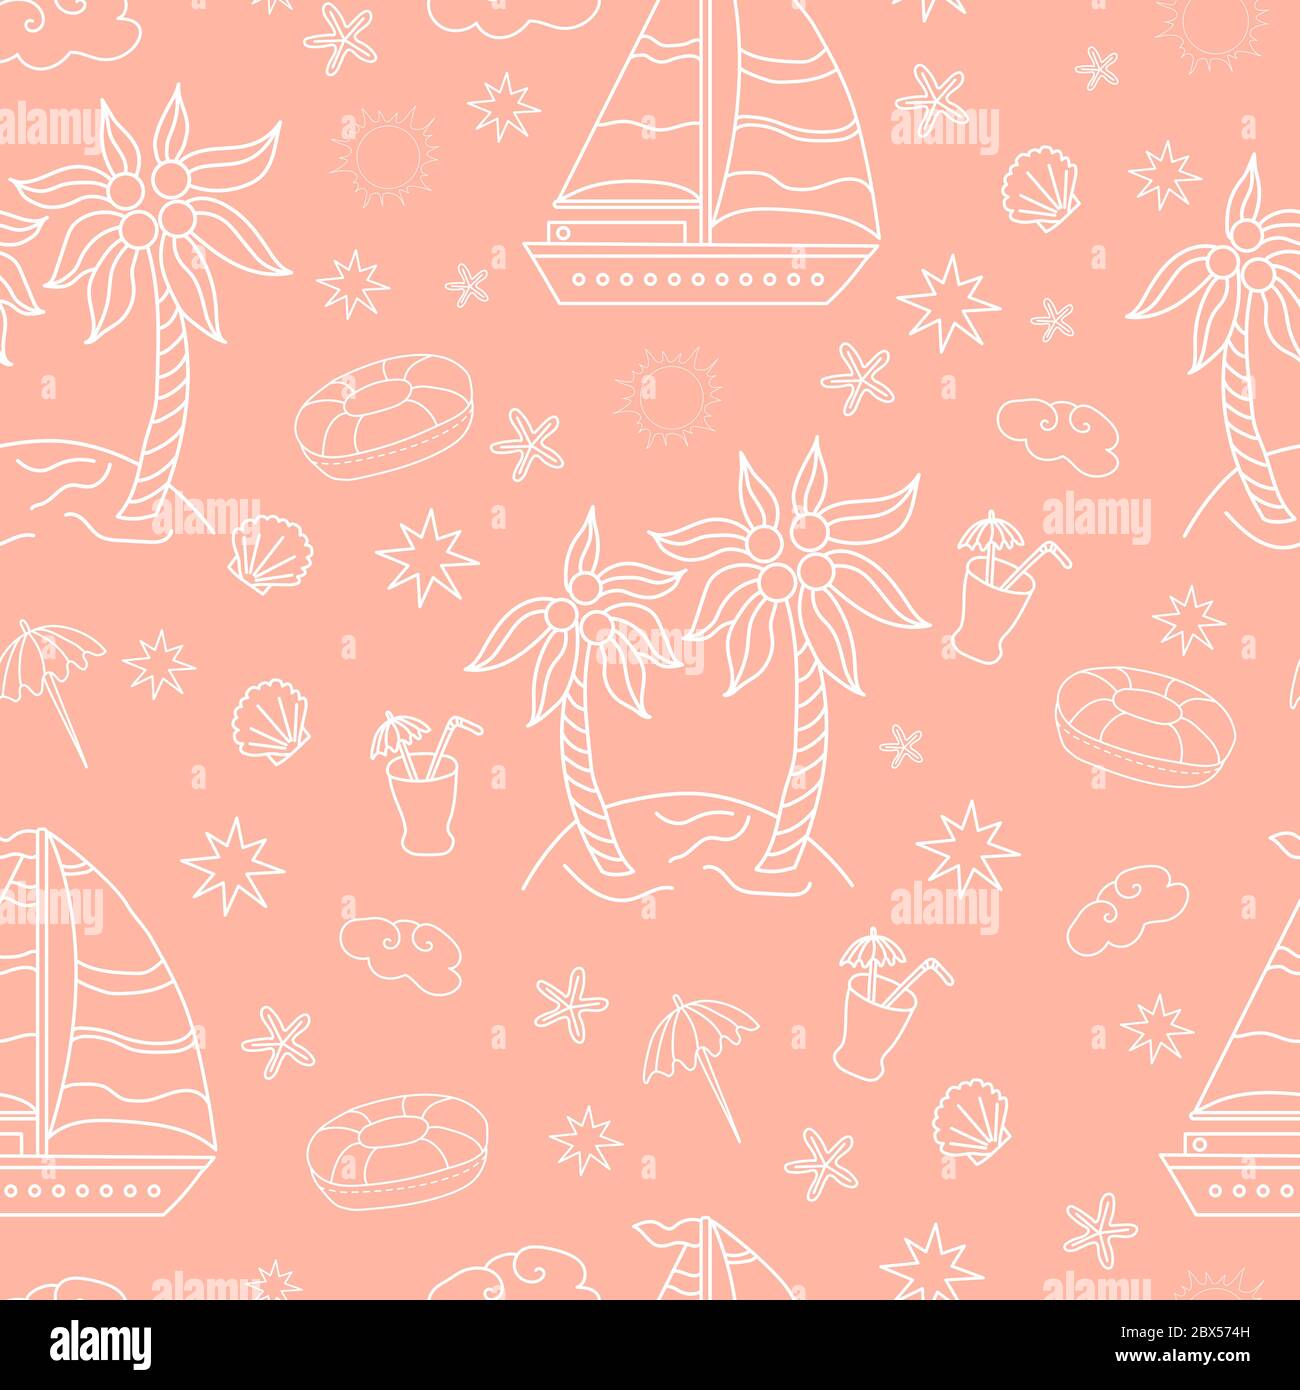 Seamless pattern. Seamless pattern Pink background with a nautical theme. Ships, palm trees on the island, cocktails and a swimming circle with shells Stock Vector